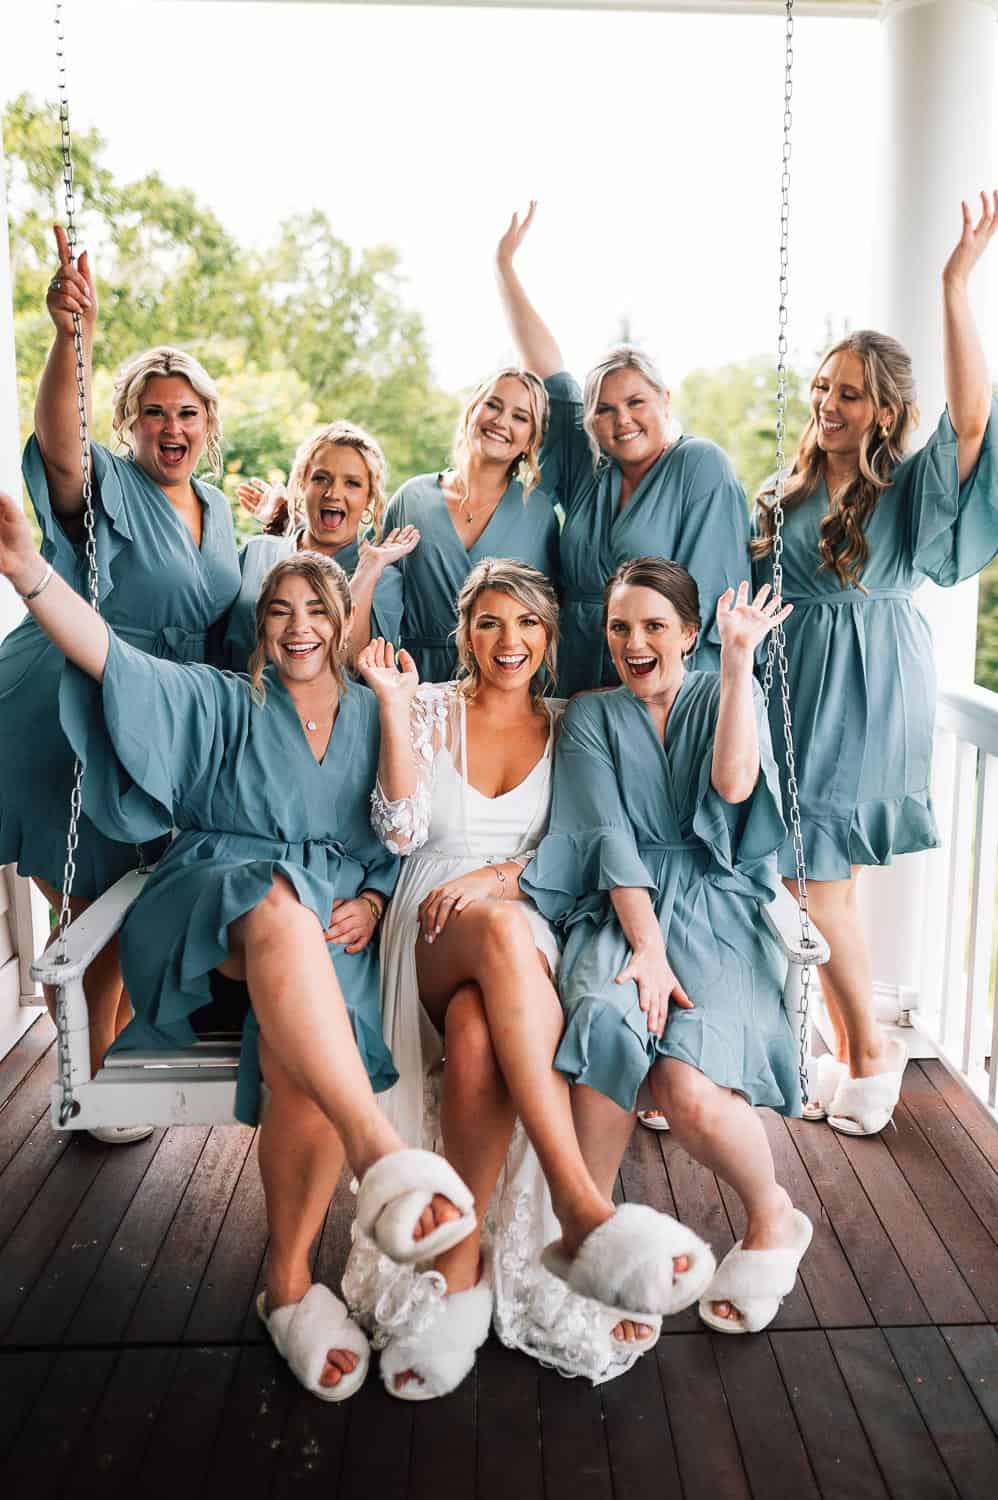 Bride and bridal party wearing slippers and sitting on a porch swing, smiling and waving.